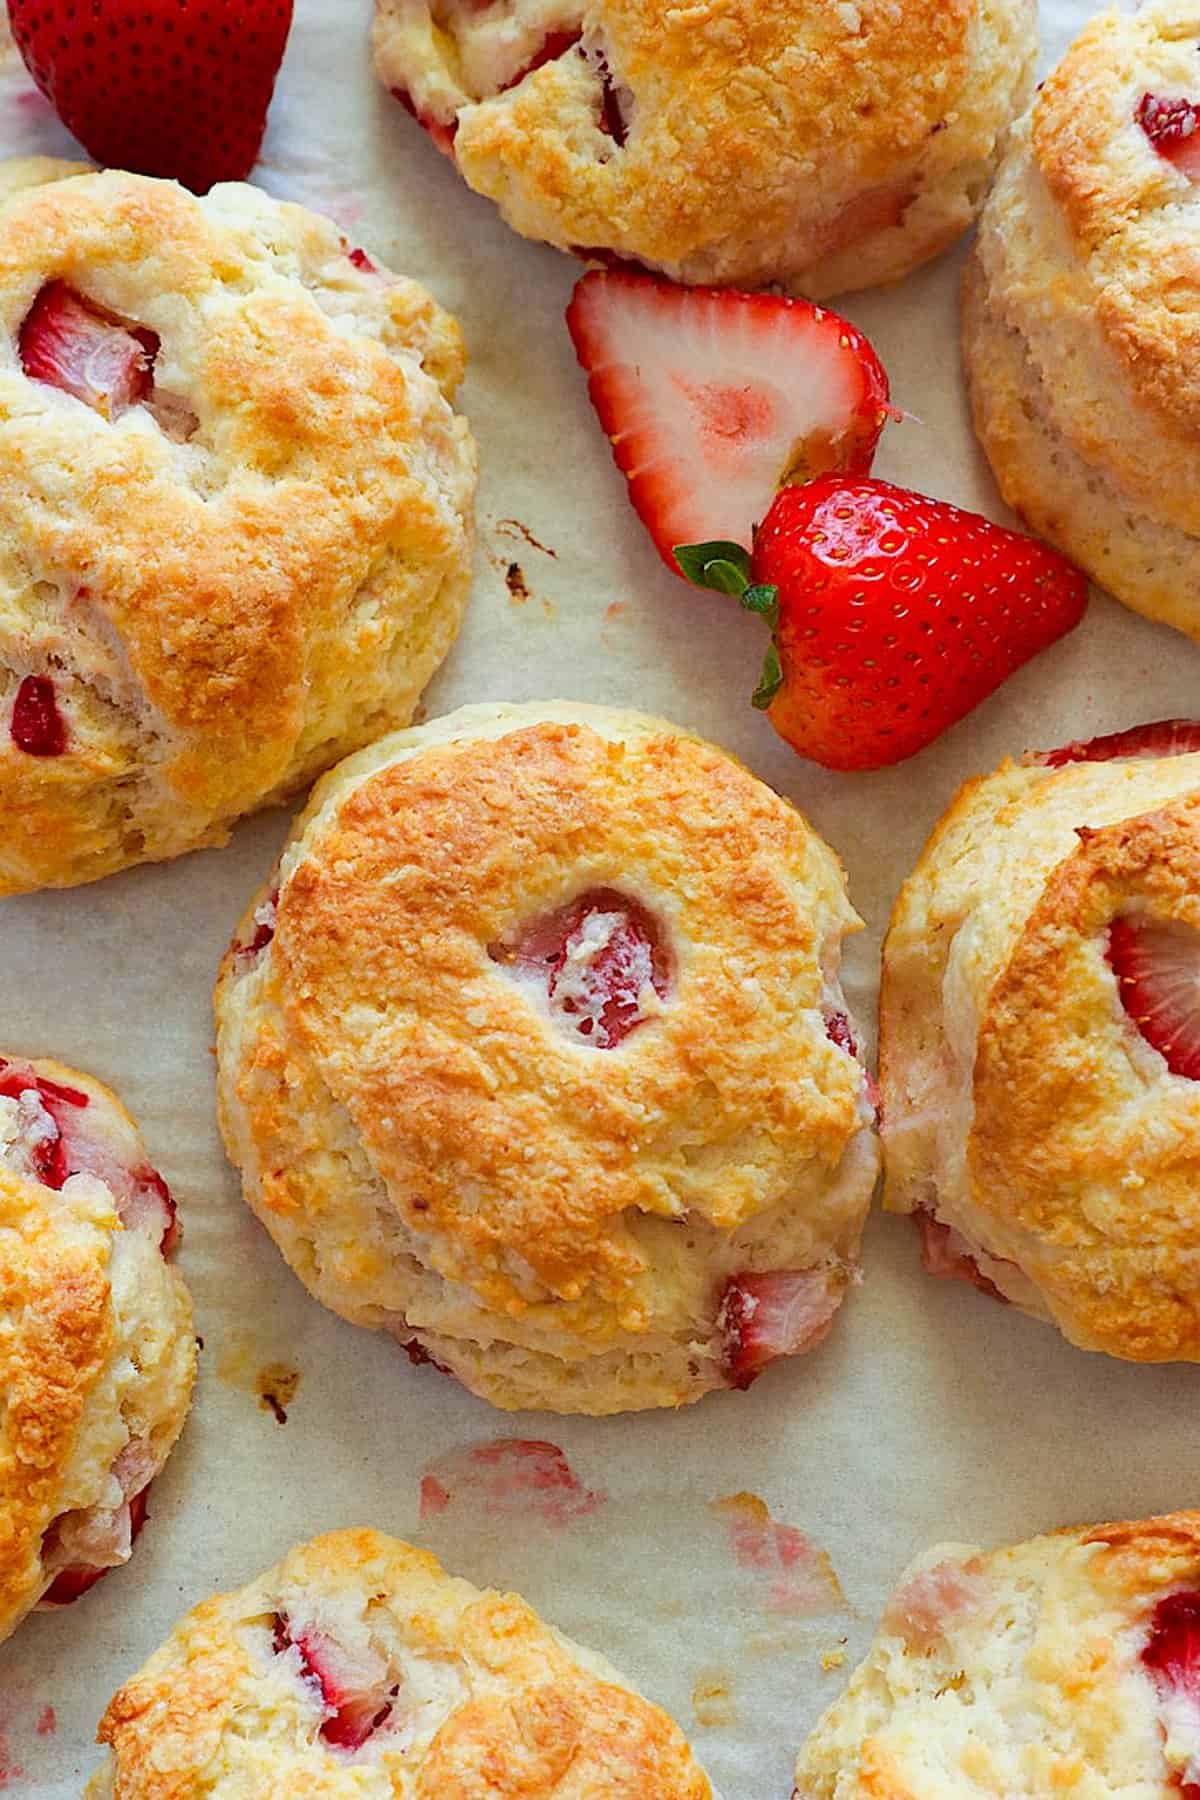 Unglazed Strawberry Biscuits with fresh strawberries on the side ready for you